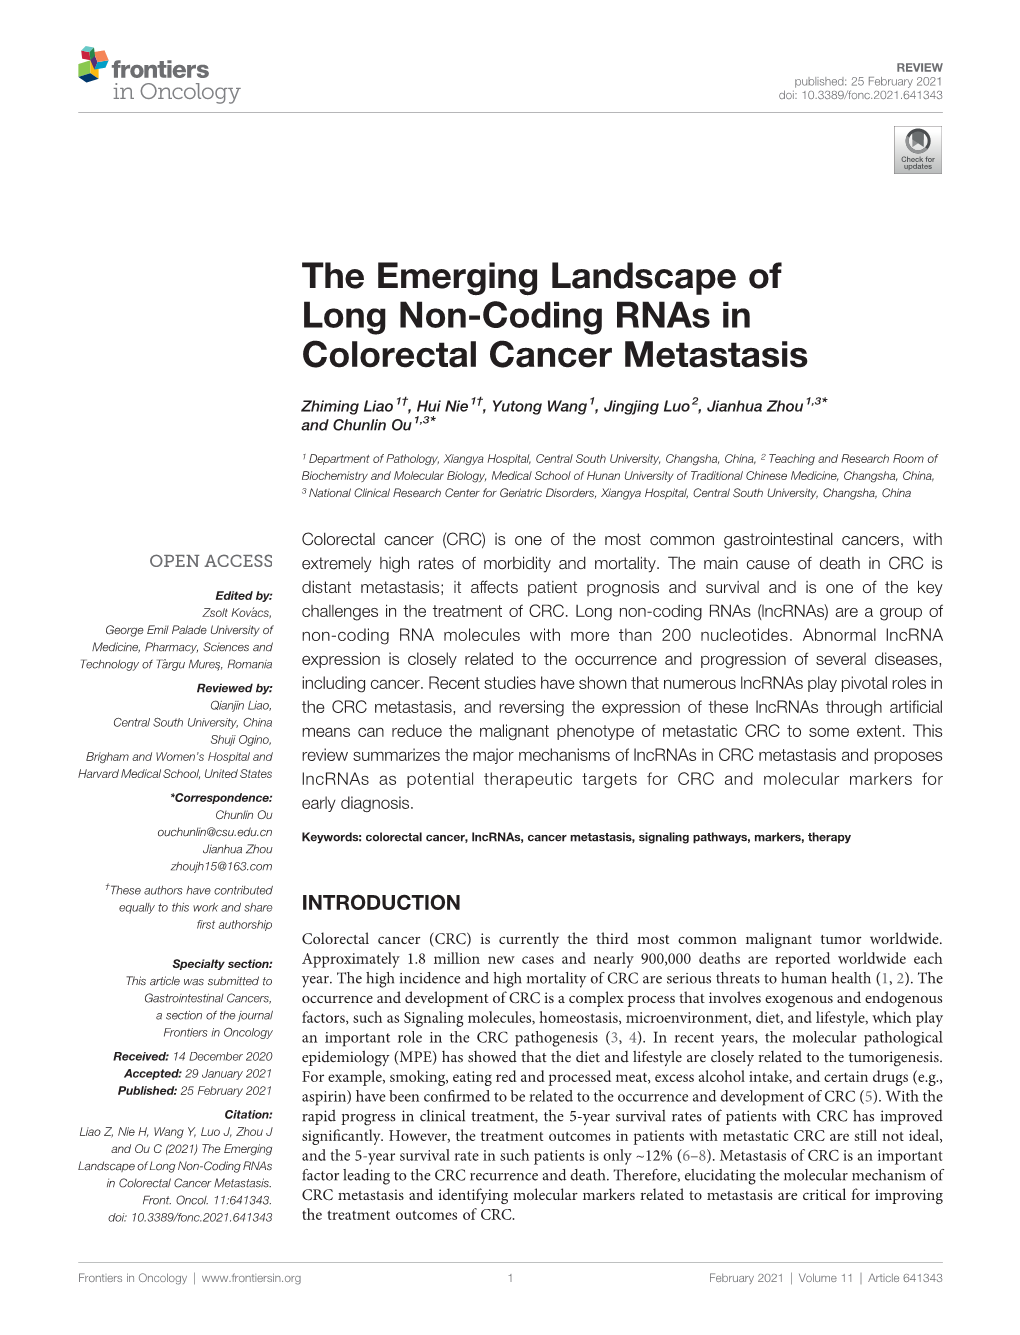 The Emerging Landscape of Long Non-Coding Rnas in Colorectal Cancer Metastasis